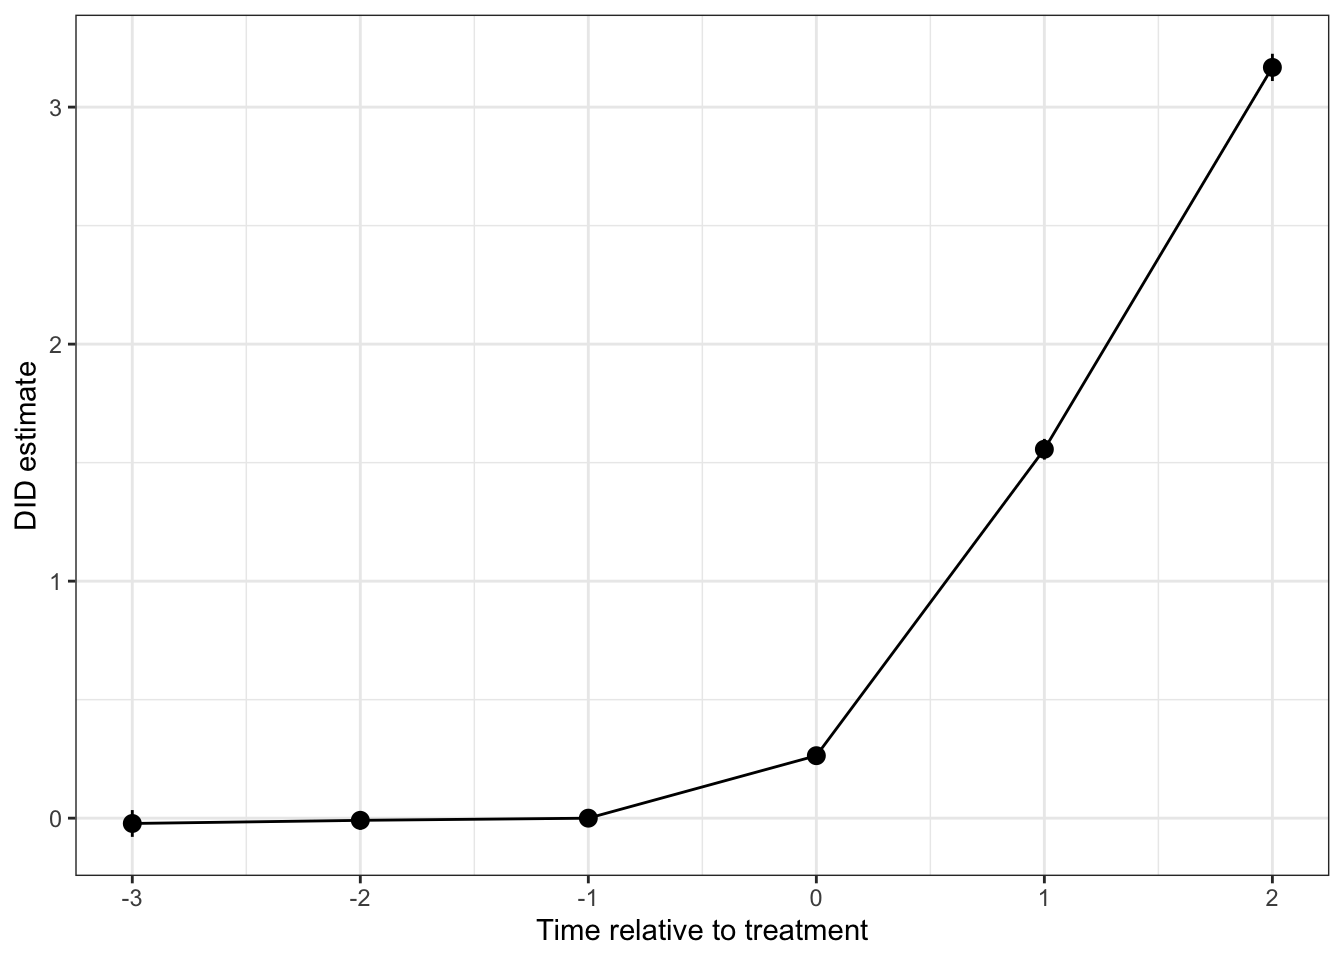 DID estimates around the treatment date estimated using TWFE (reference period $\tau'=1$)